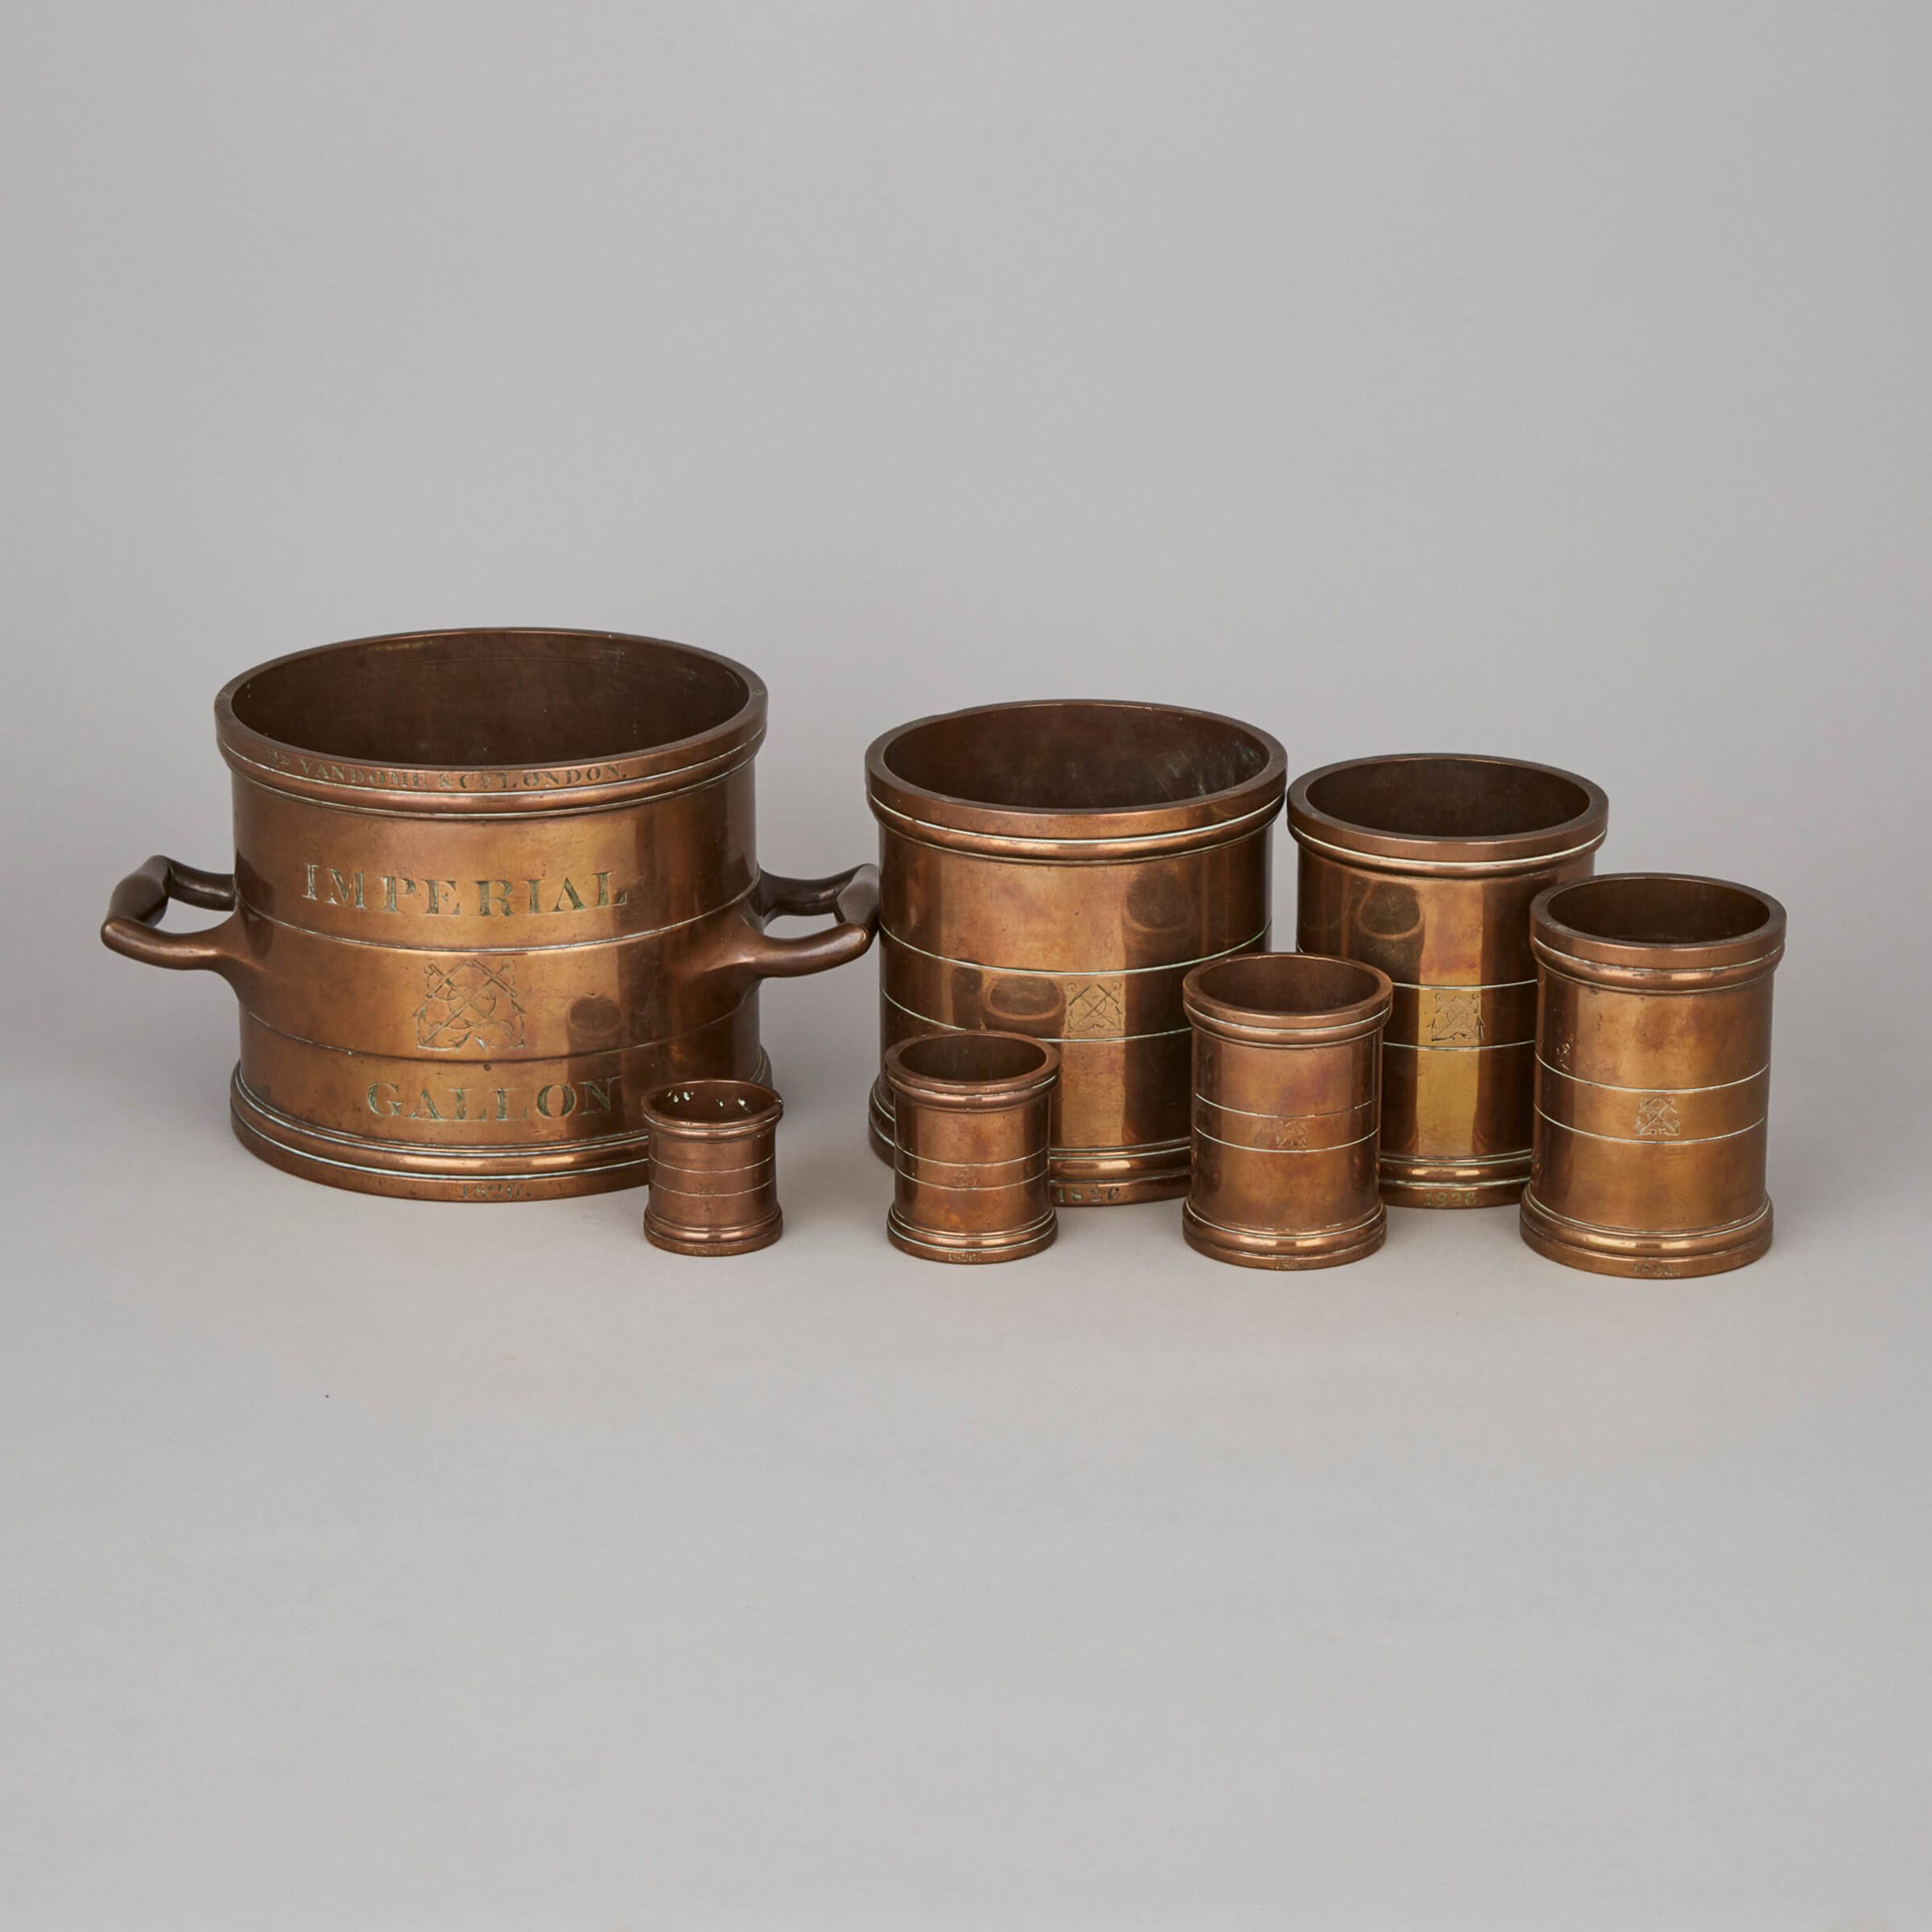 English Set of Seven Turned Brass Royal Navy Graduated Imperial Measures,  Rd. Vandome, London, 1826